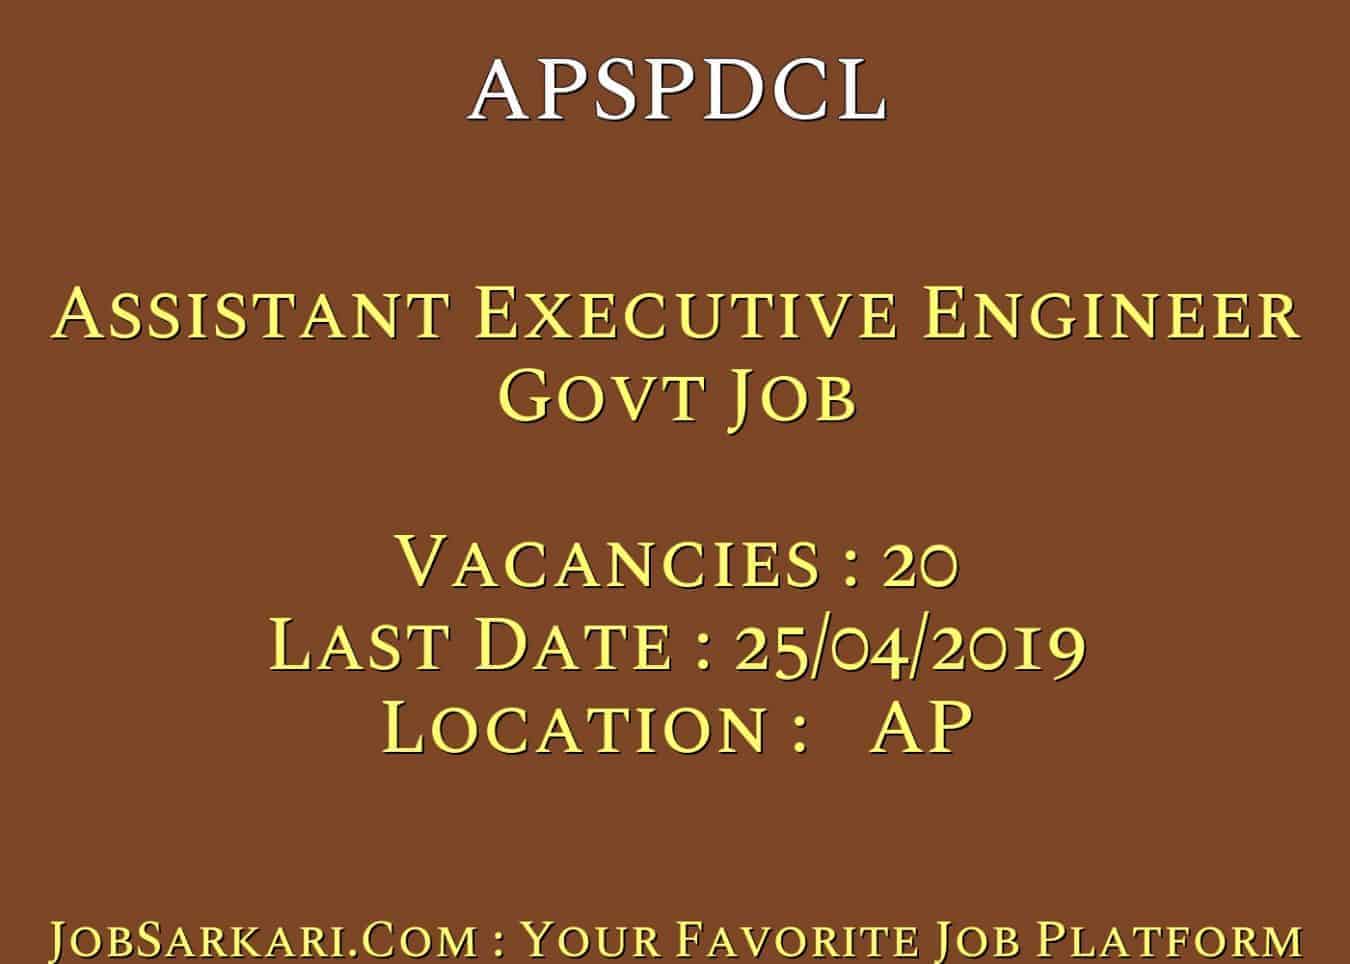 APSPDCL Recruitment 2019 For Assistant Executive Engineer Govt Job